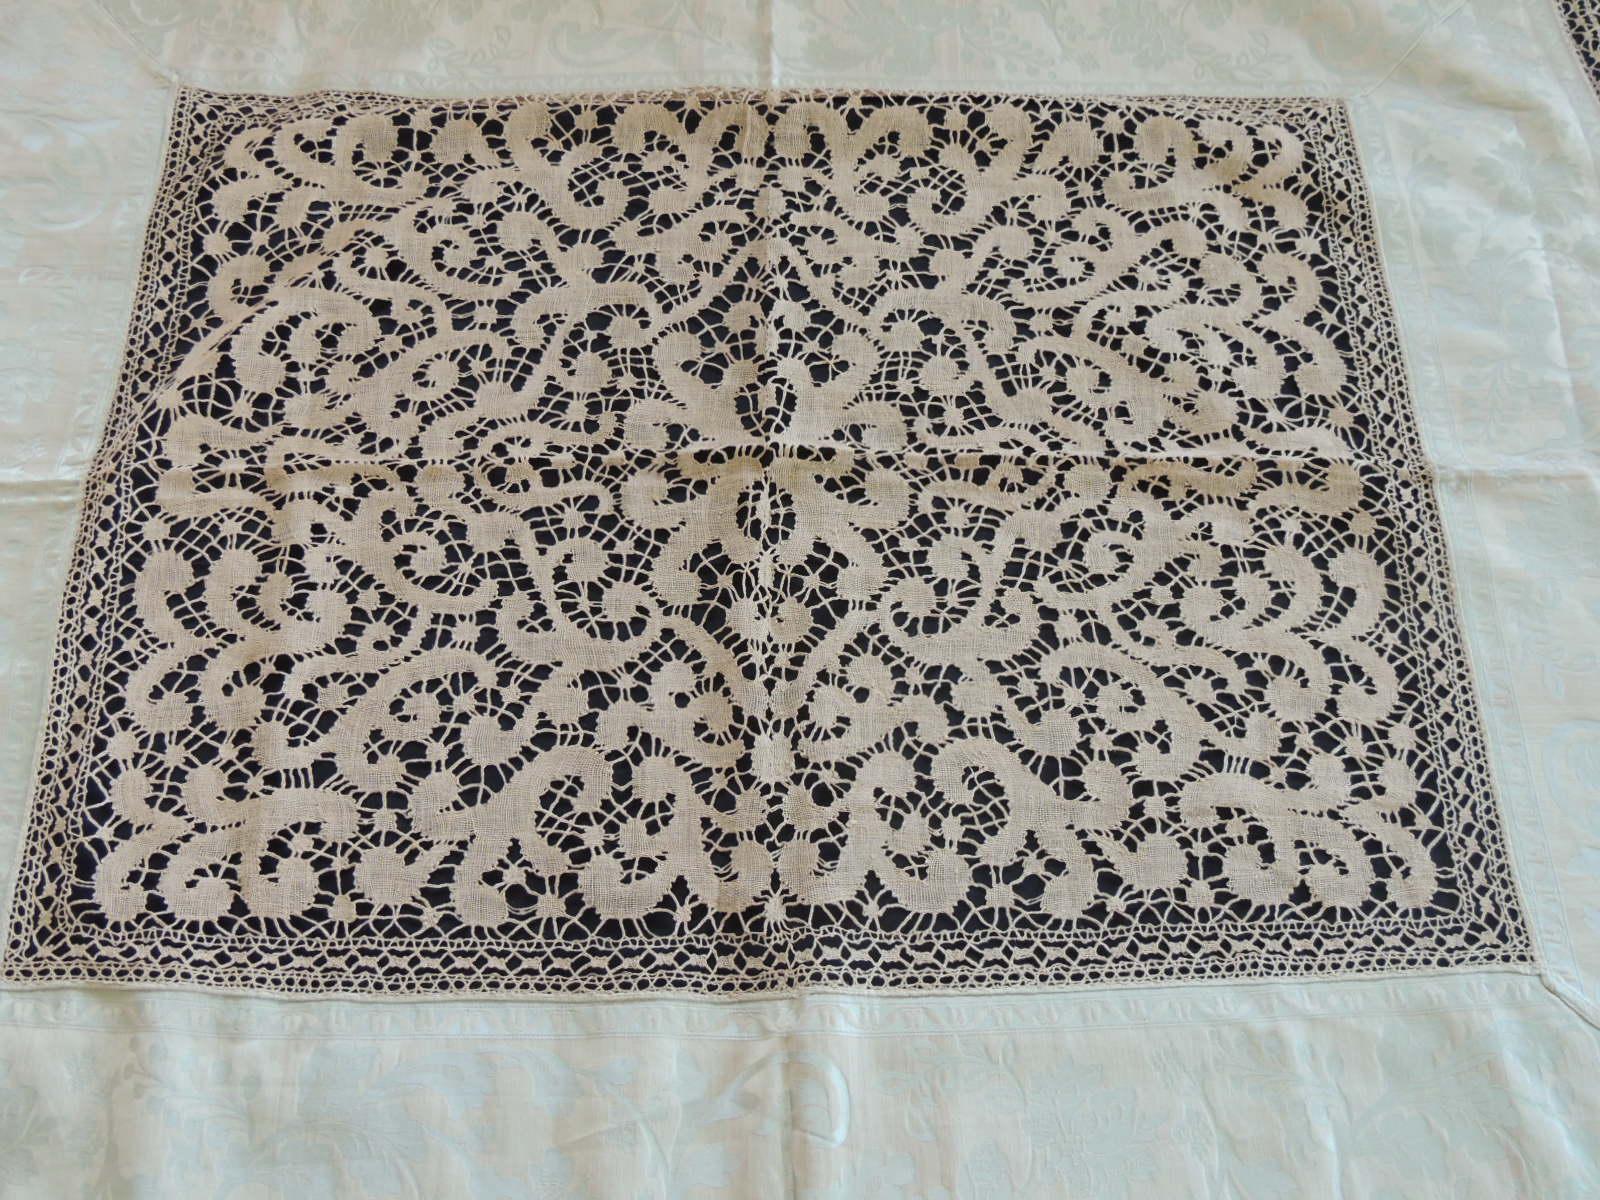 Bobbin Lace and Damask Bed Topper with Large Lace Center Panel 7